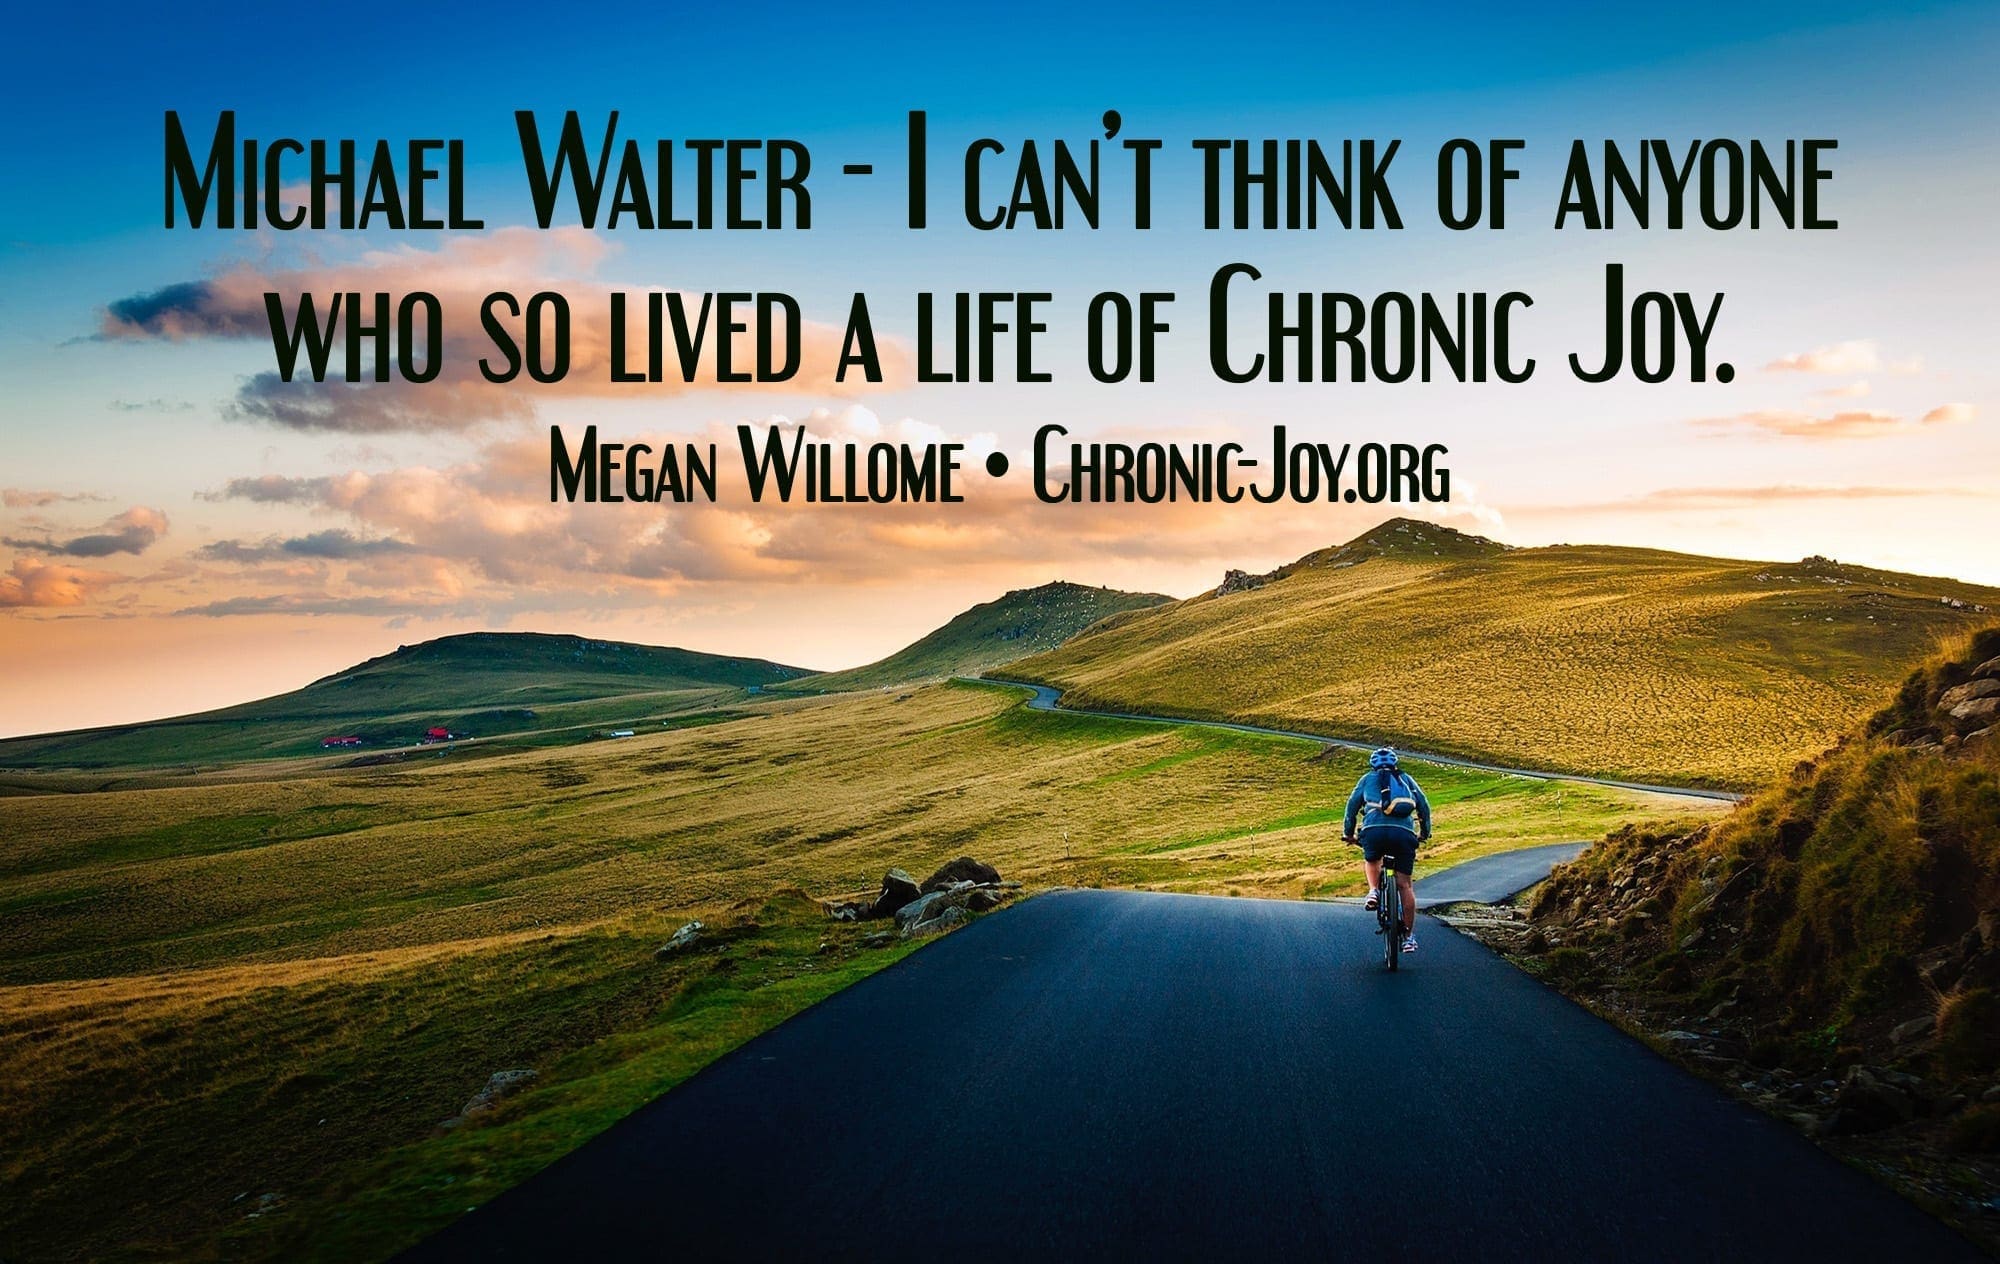 Michael Walter - I can’t think of anyone who so lived a life of Chronic Joy.